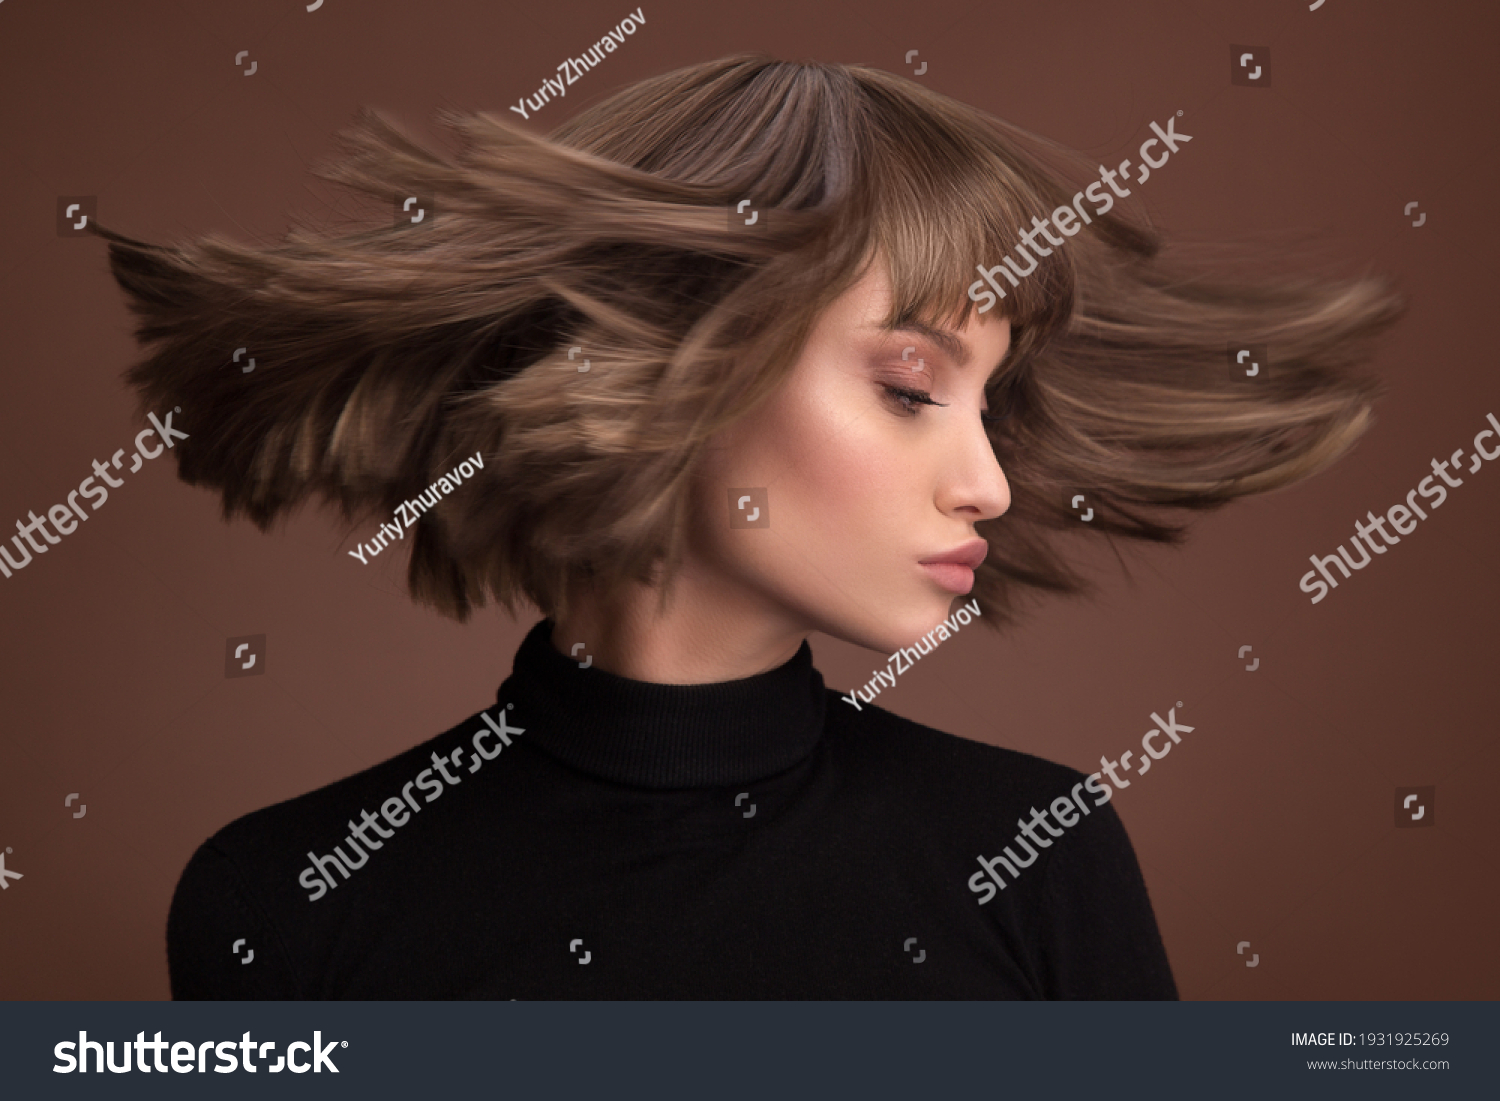 Portrait of a beautiful brown-haired woman with a short haircut on a brown background #1931925269